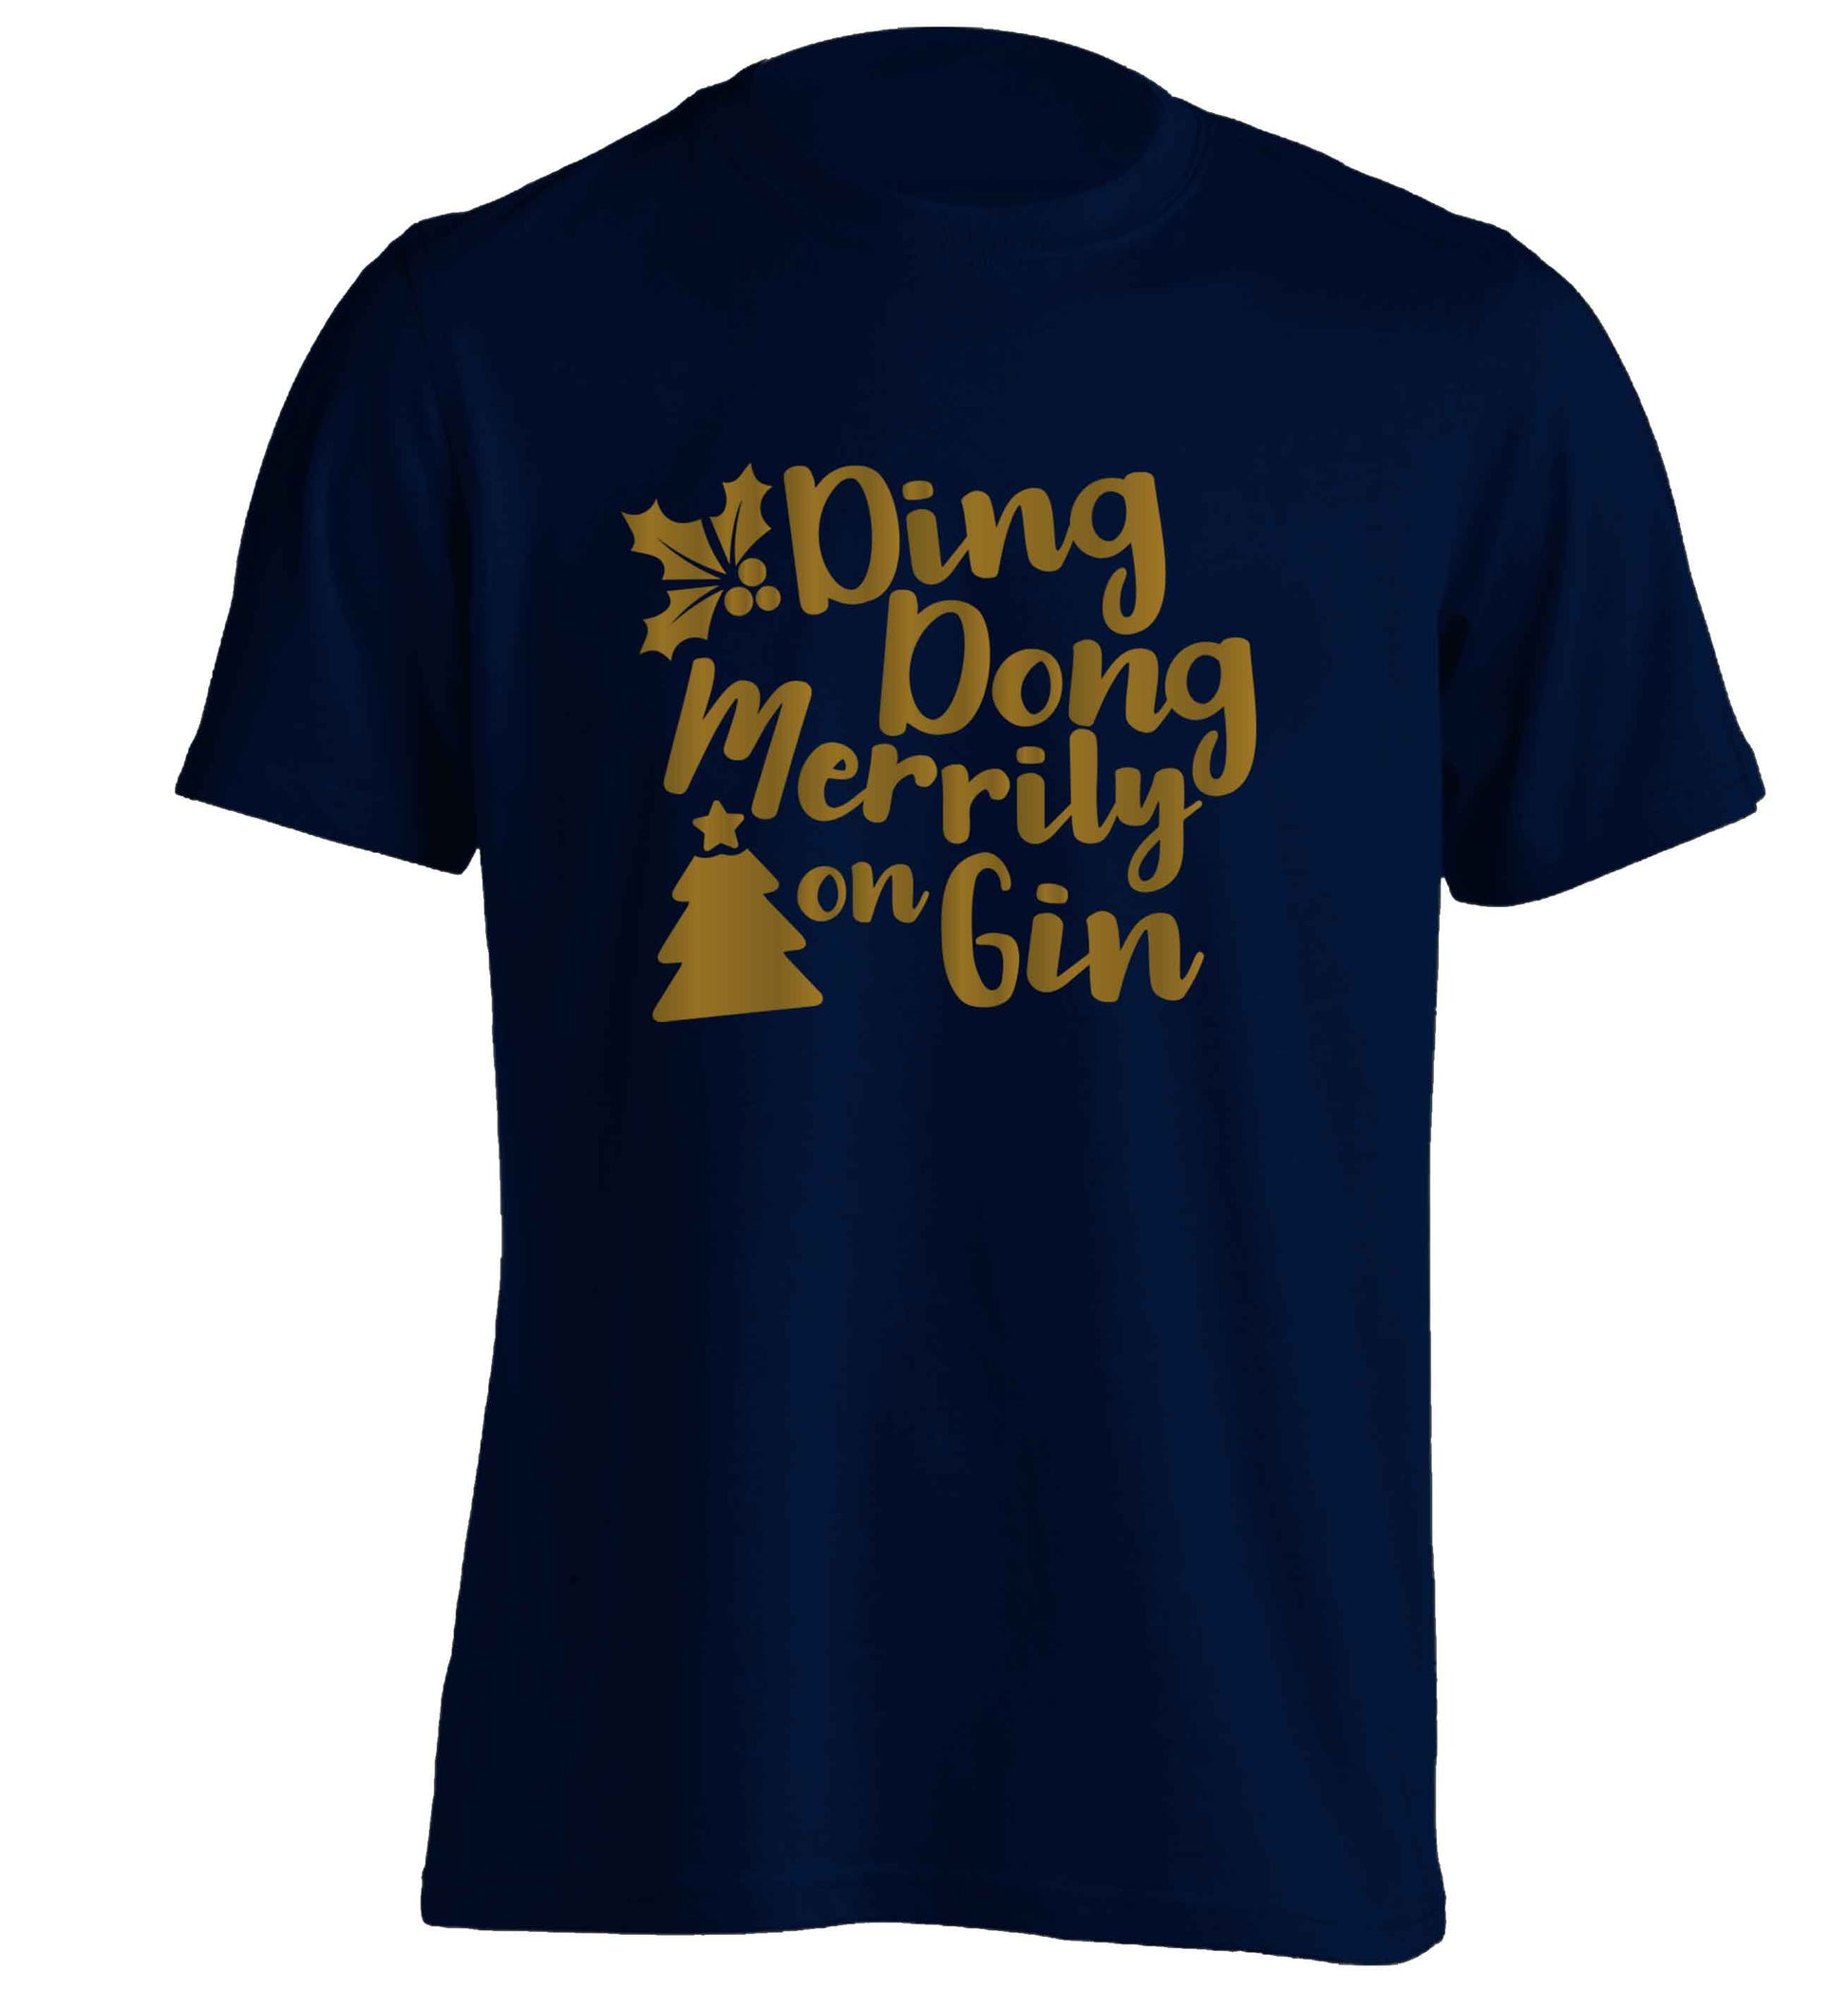 Ding dong merrily on gin adults unisex navy Tshirt 2XL